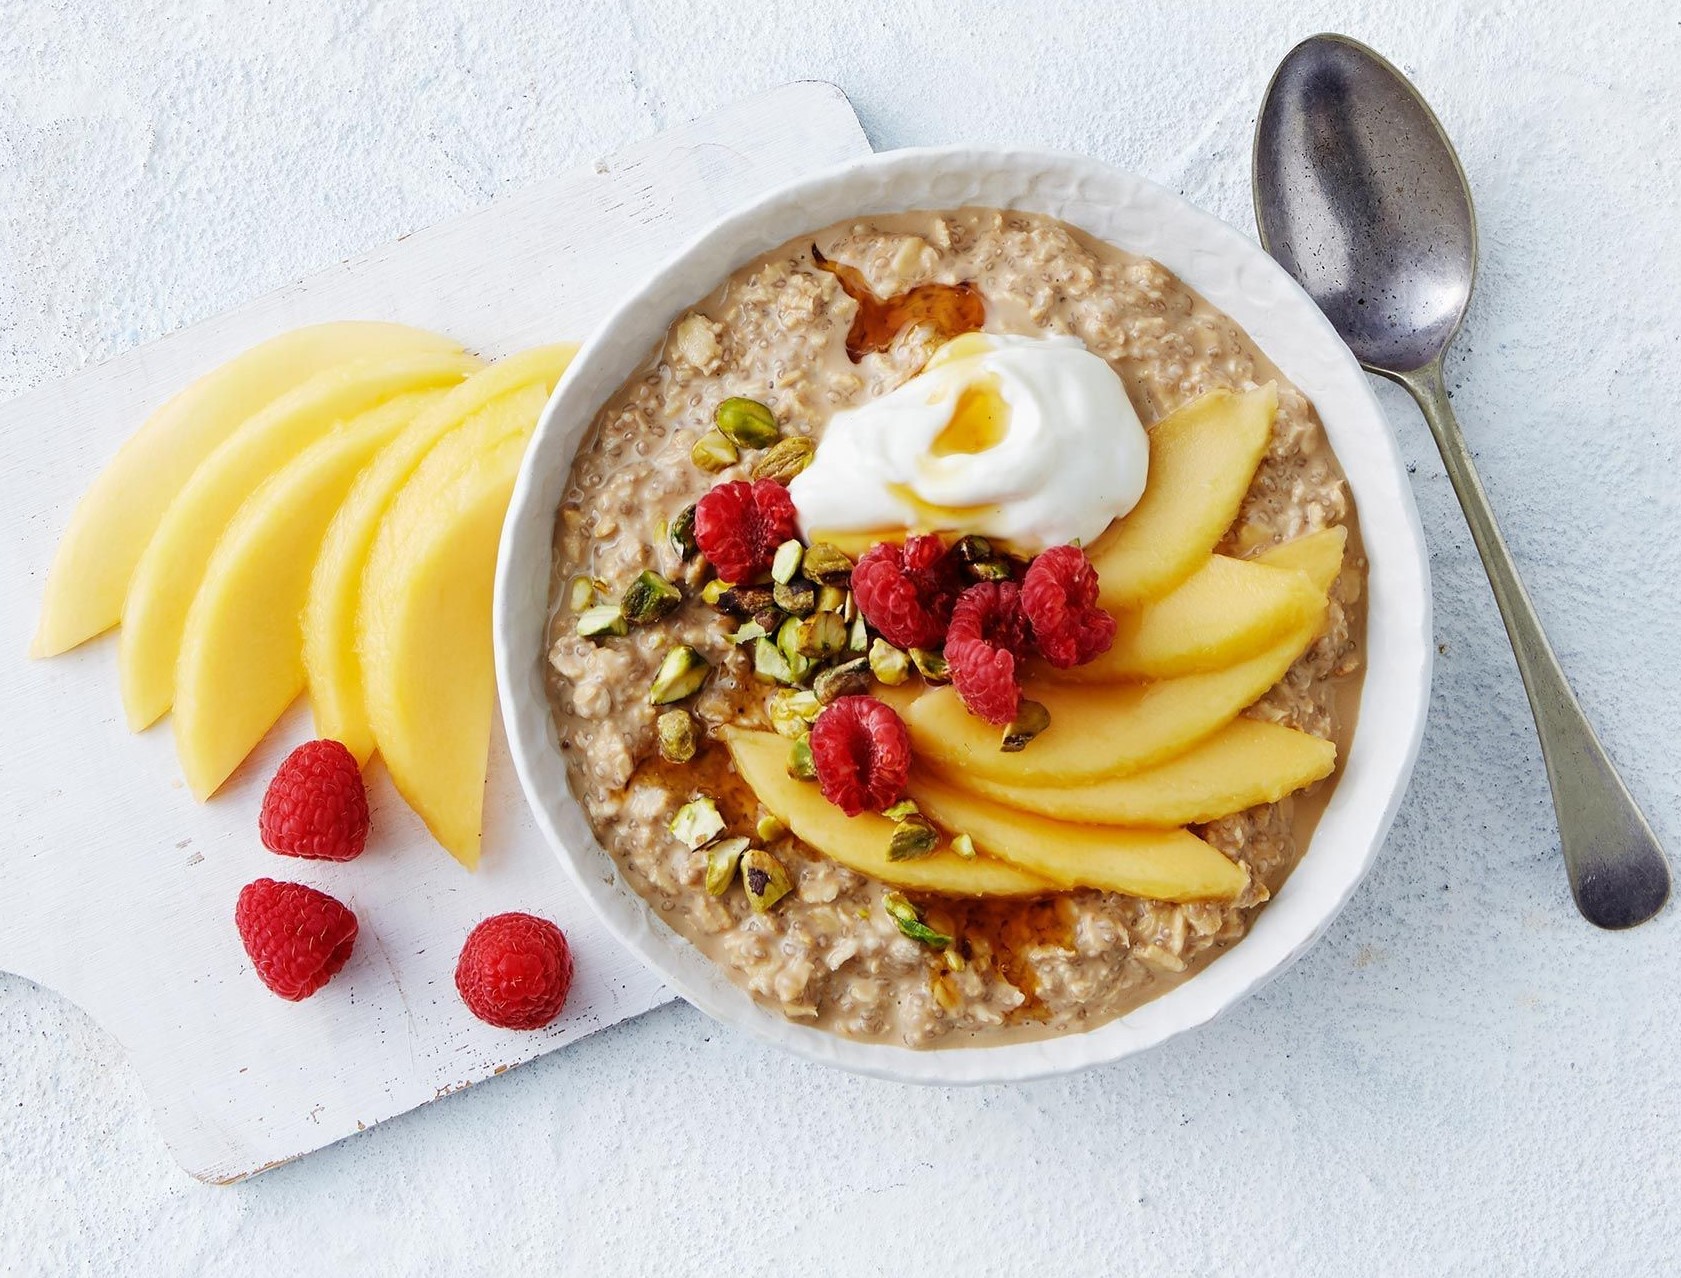 Weight loss with oats: innovative ways to cook fiber-rich oats